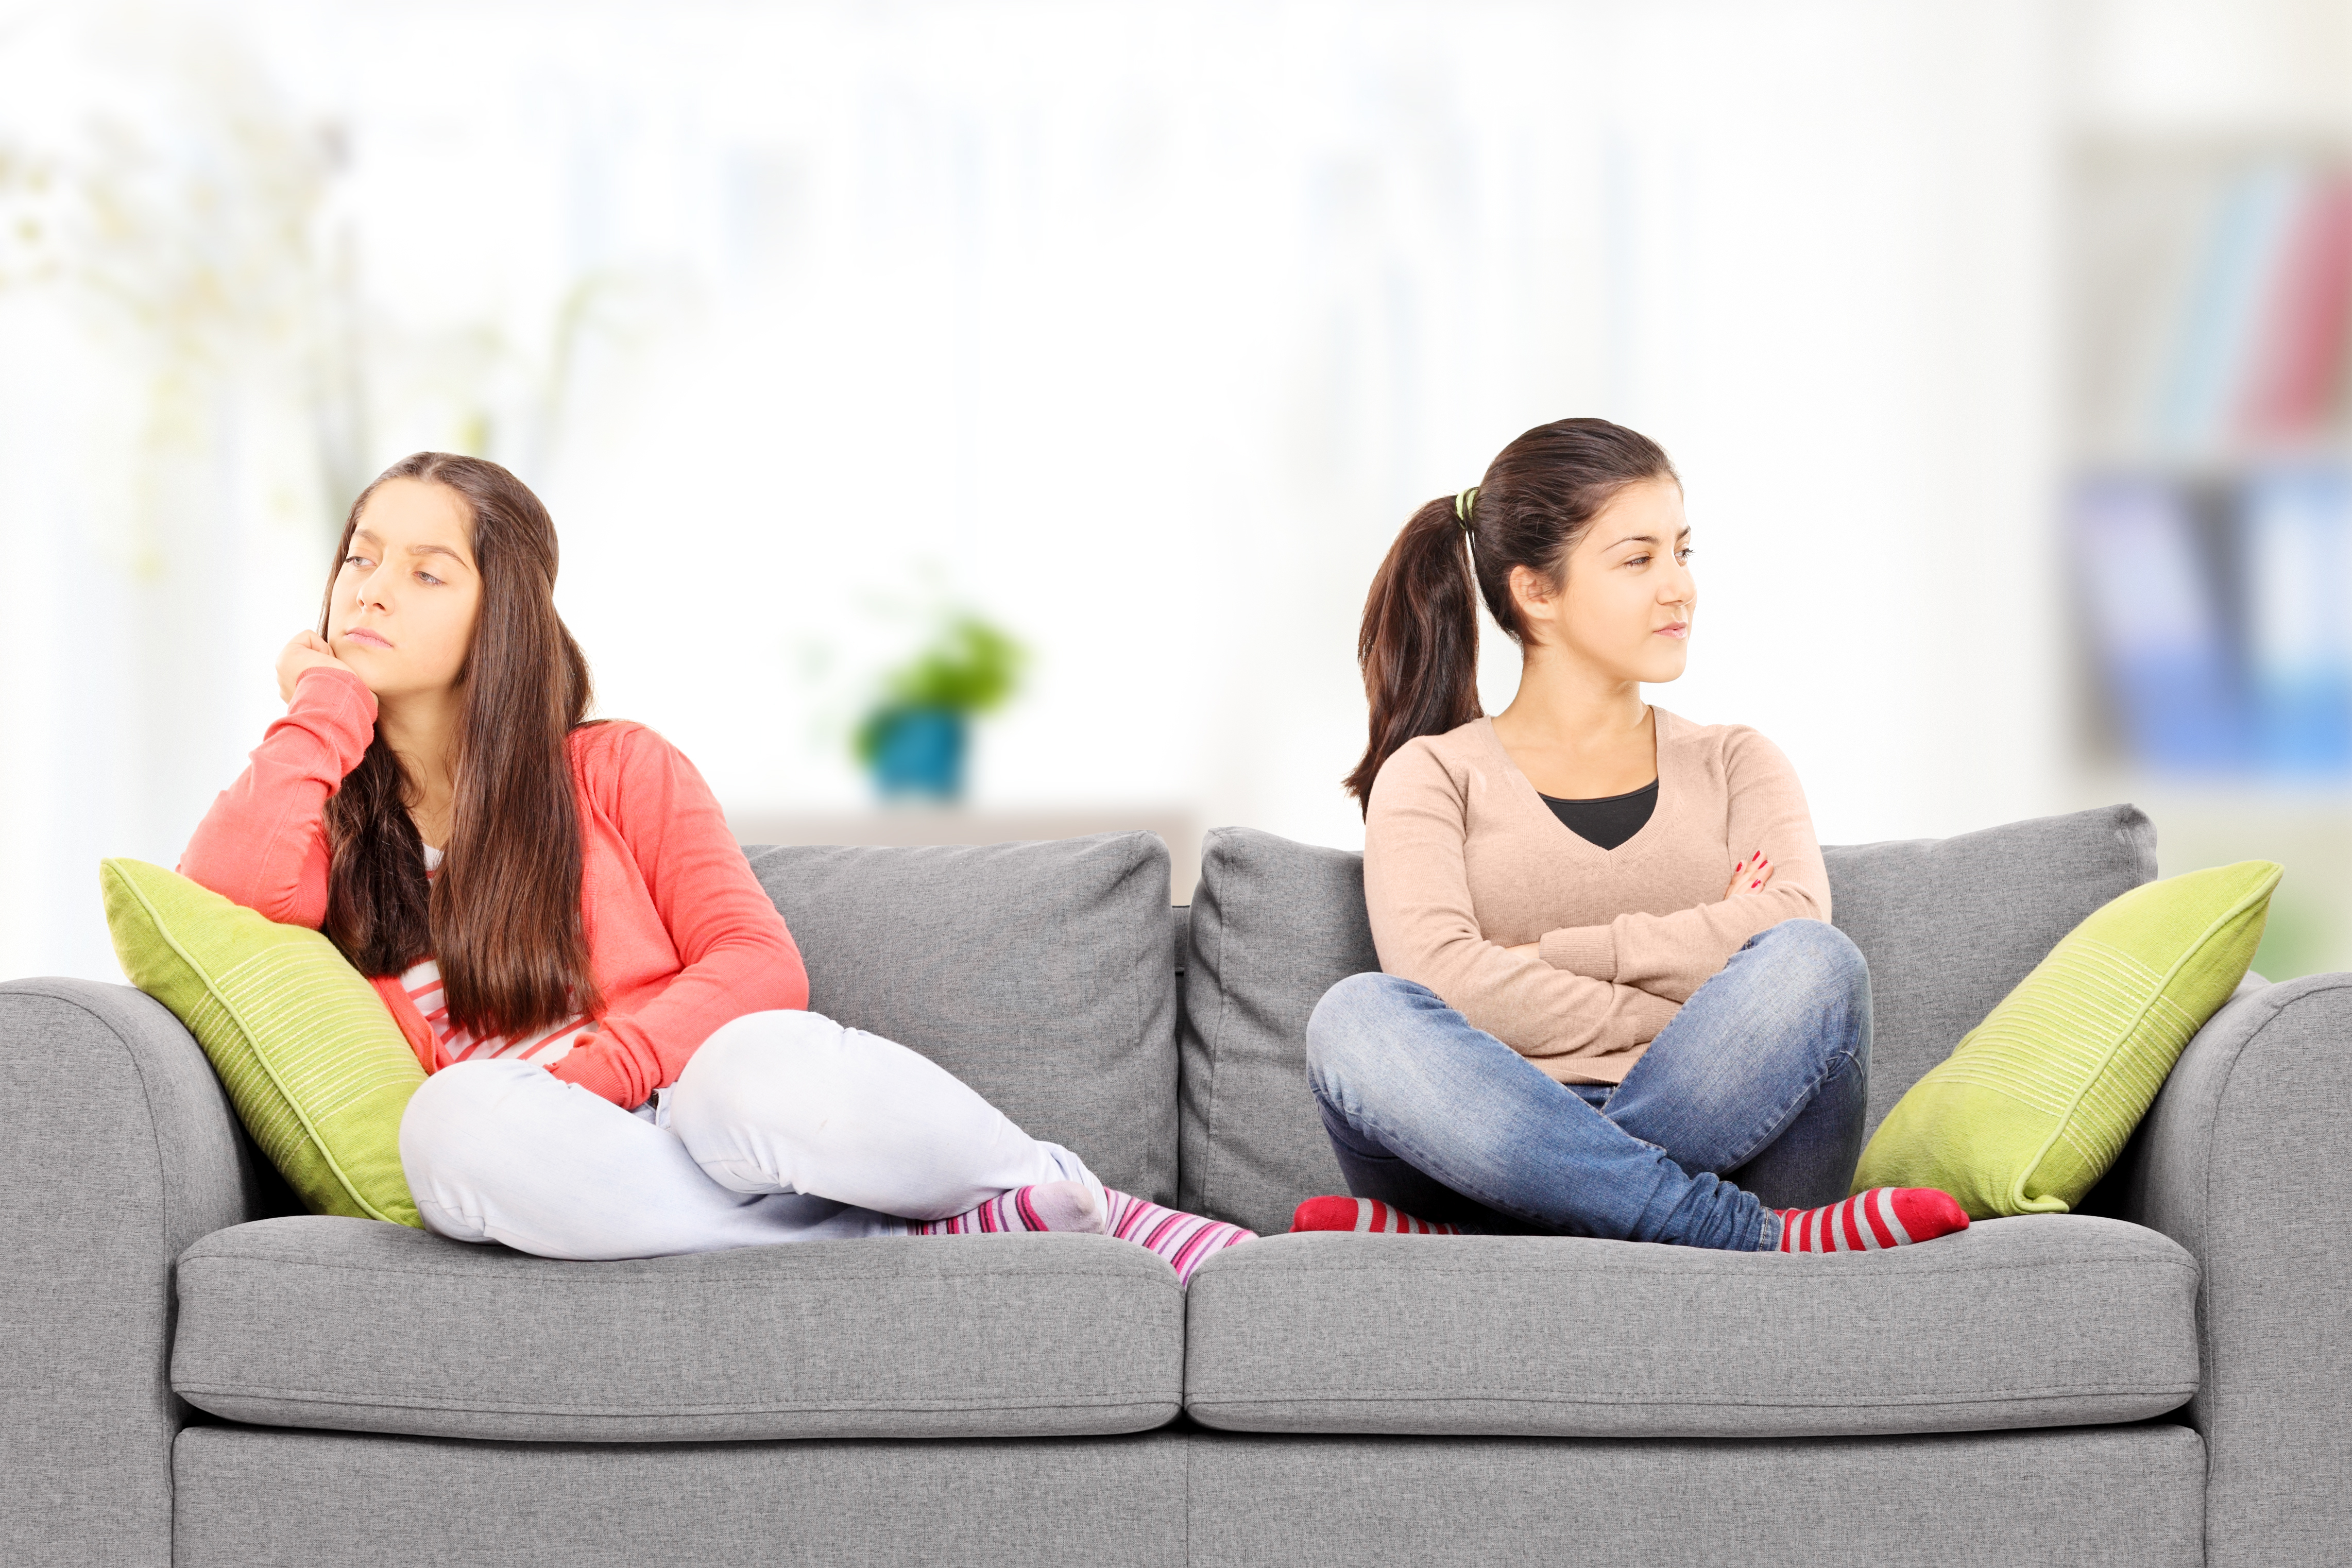 Two girls unhappy with each other | Source: Shutterstock